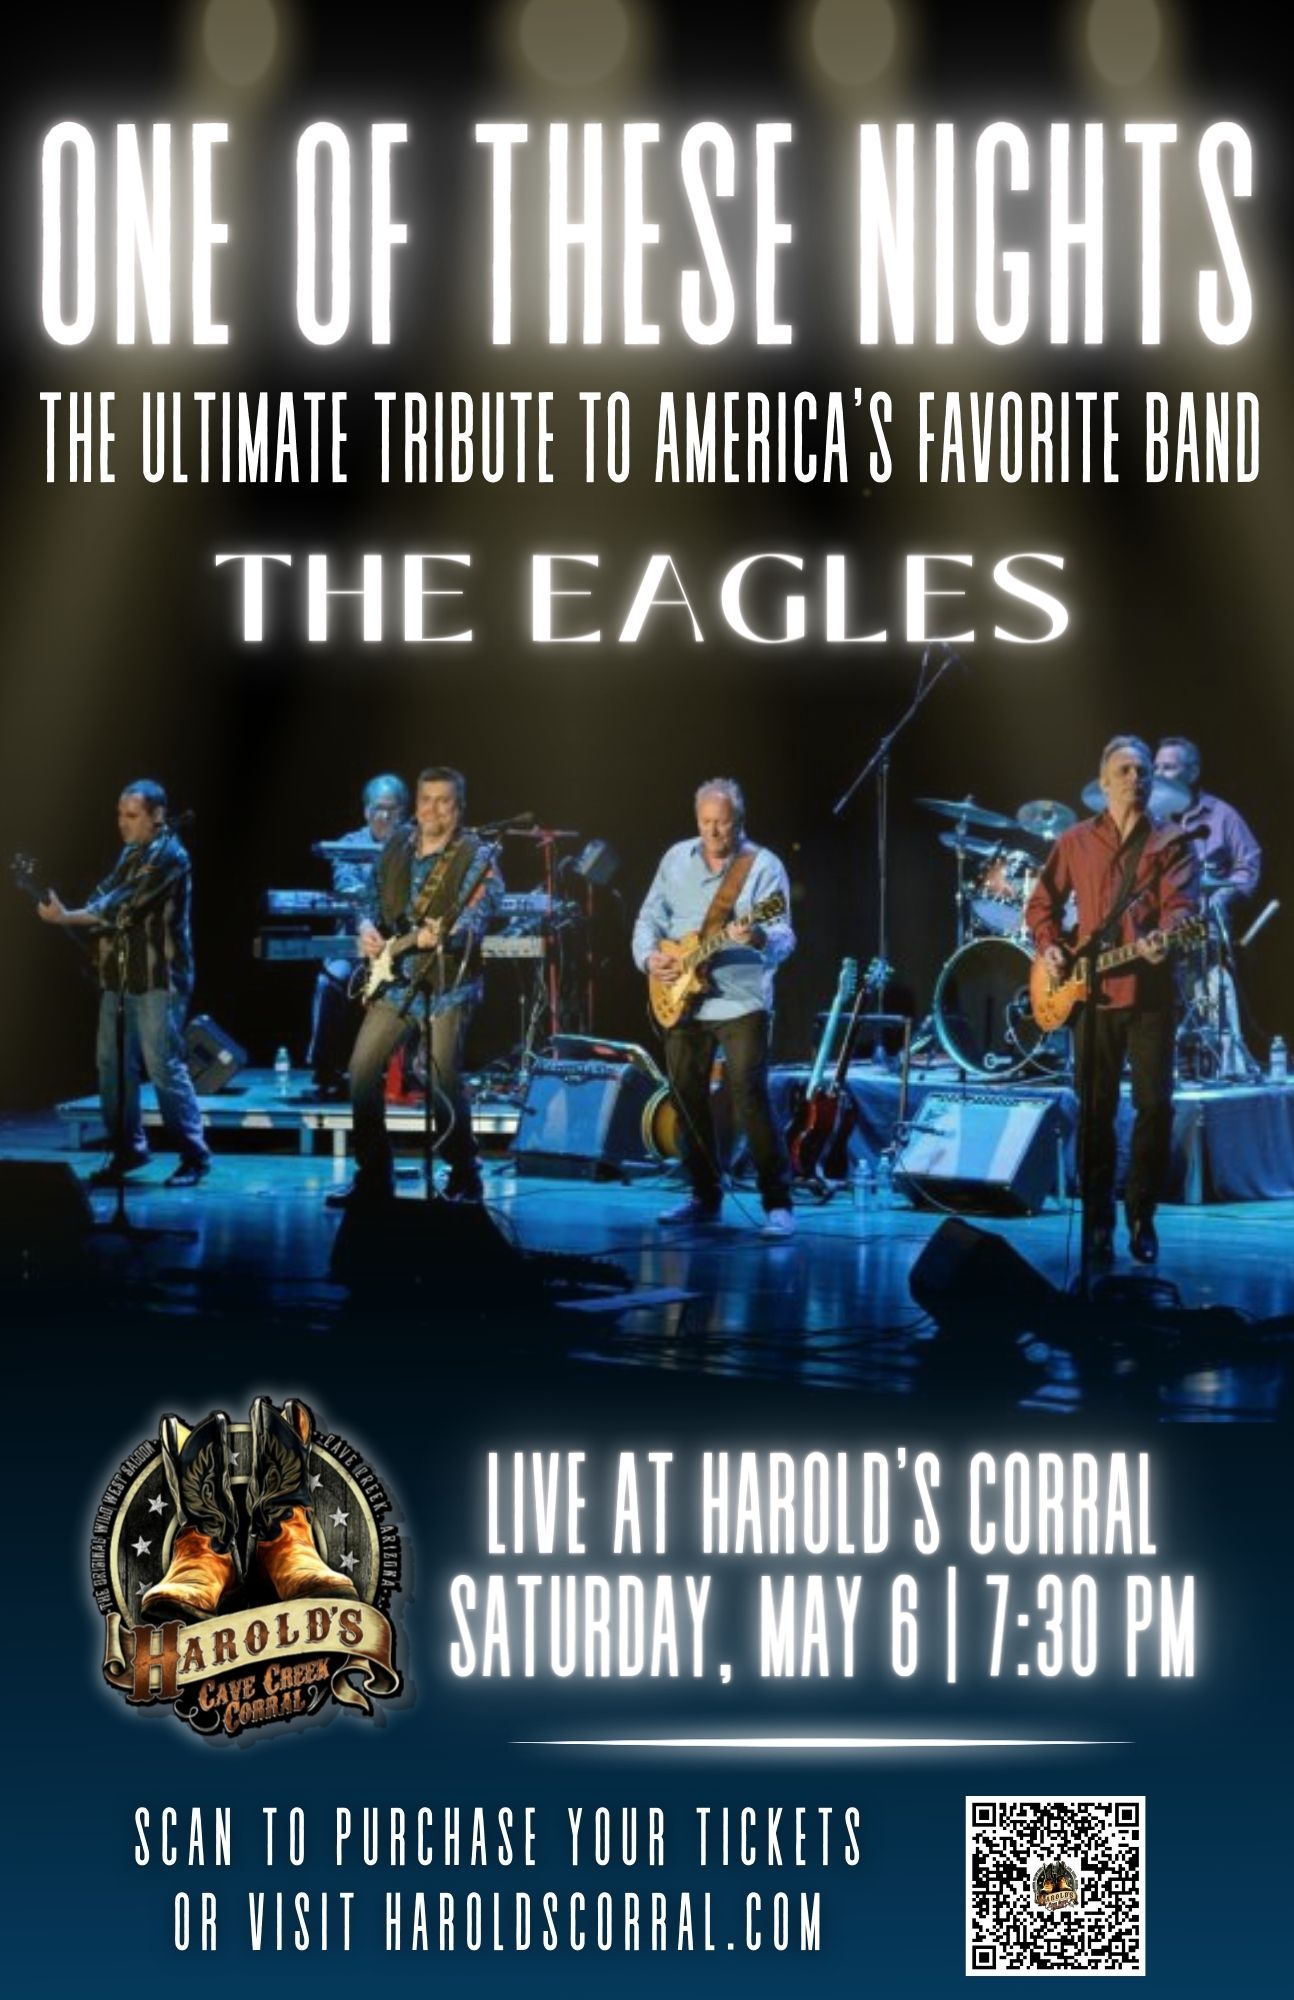 One of these nights tribute to the eagles at harold's corral